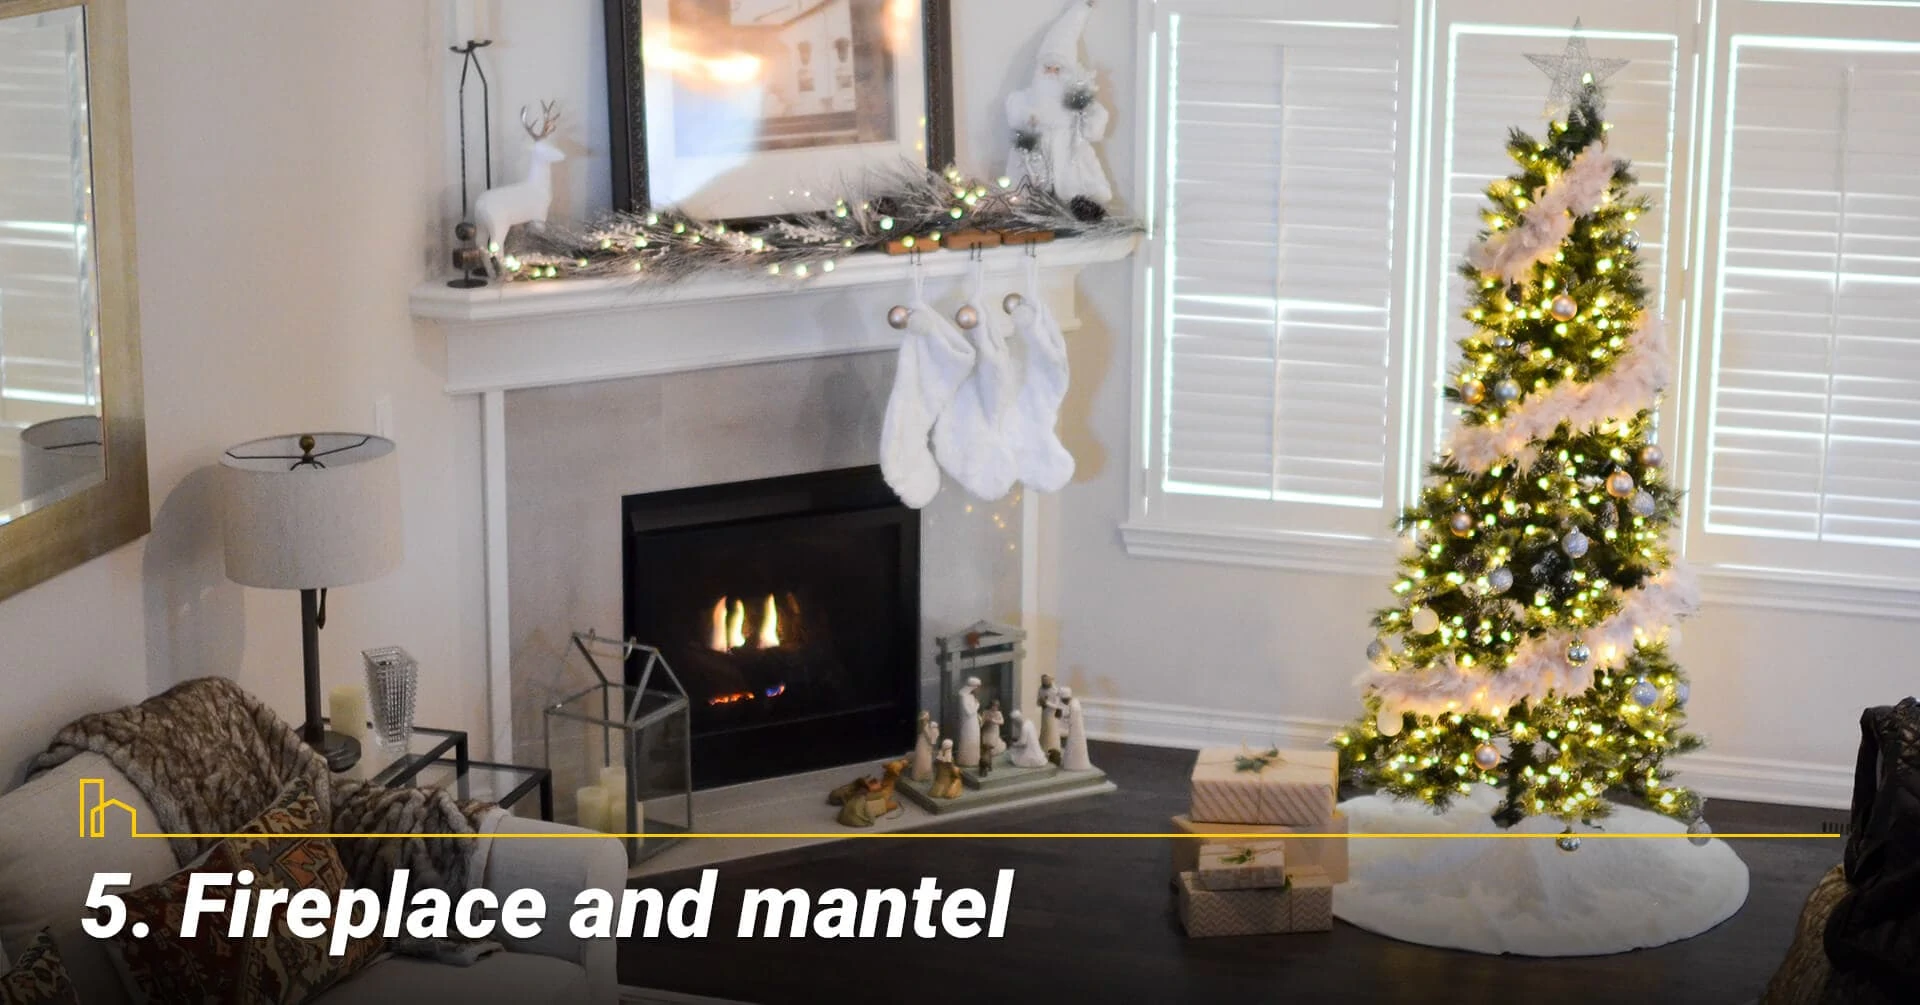 Fireplace and mantel, add decorative ornaments to your fireplace and mantel